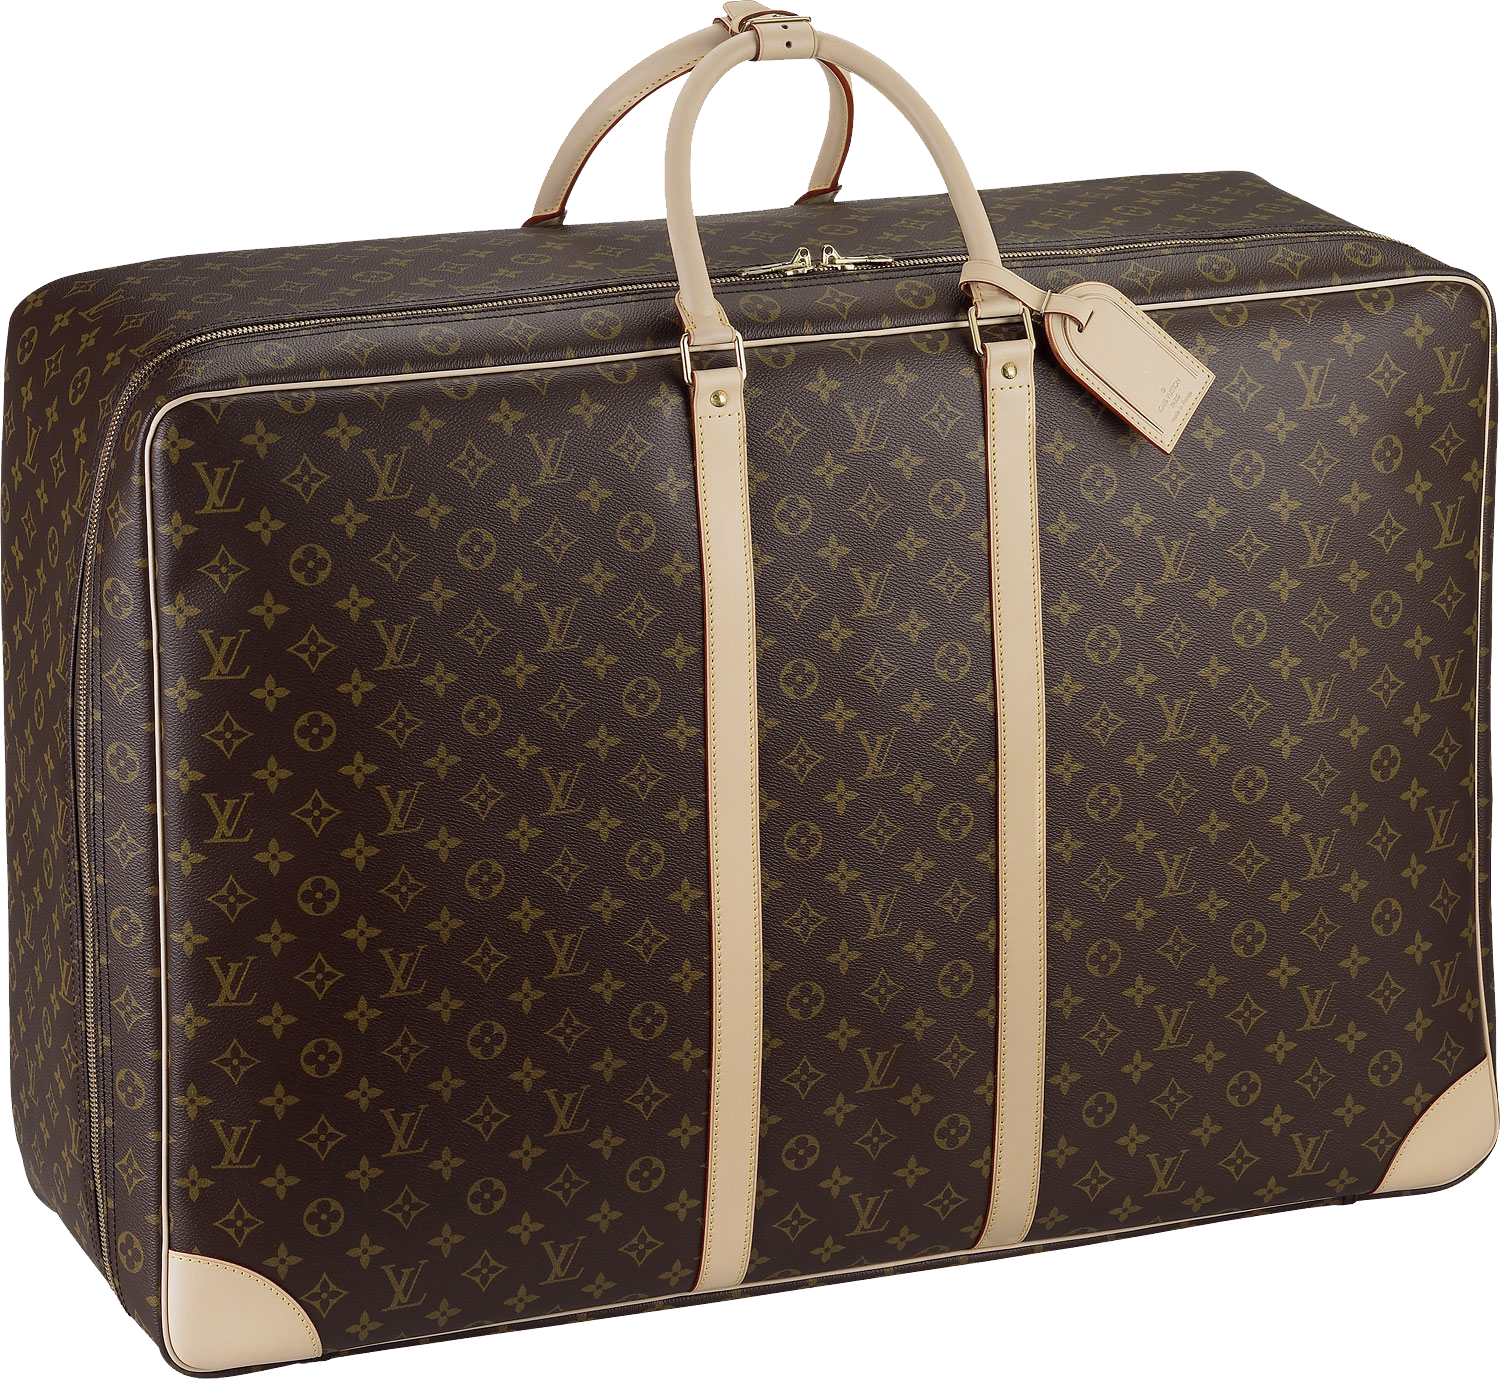 Suitcase PNG Image - PurePNG | Free transparent CC0 PNG Image Library